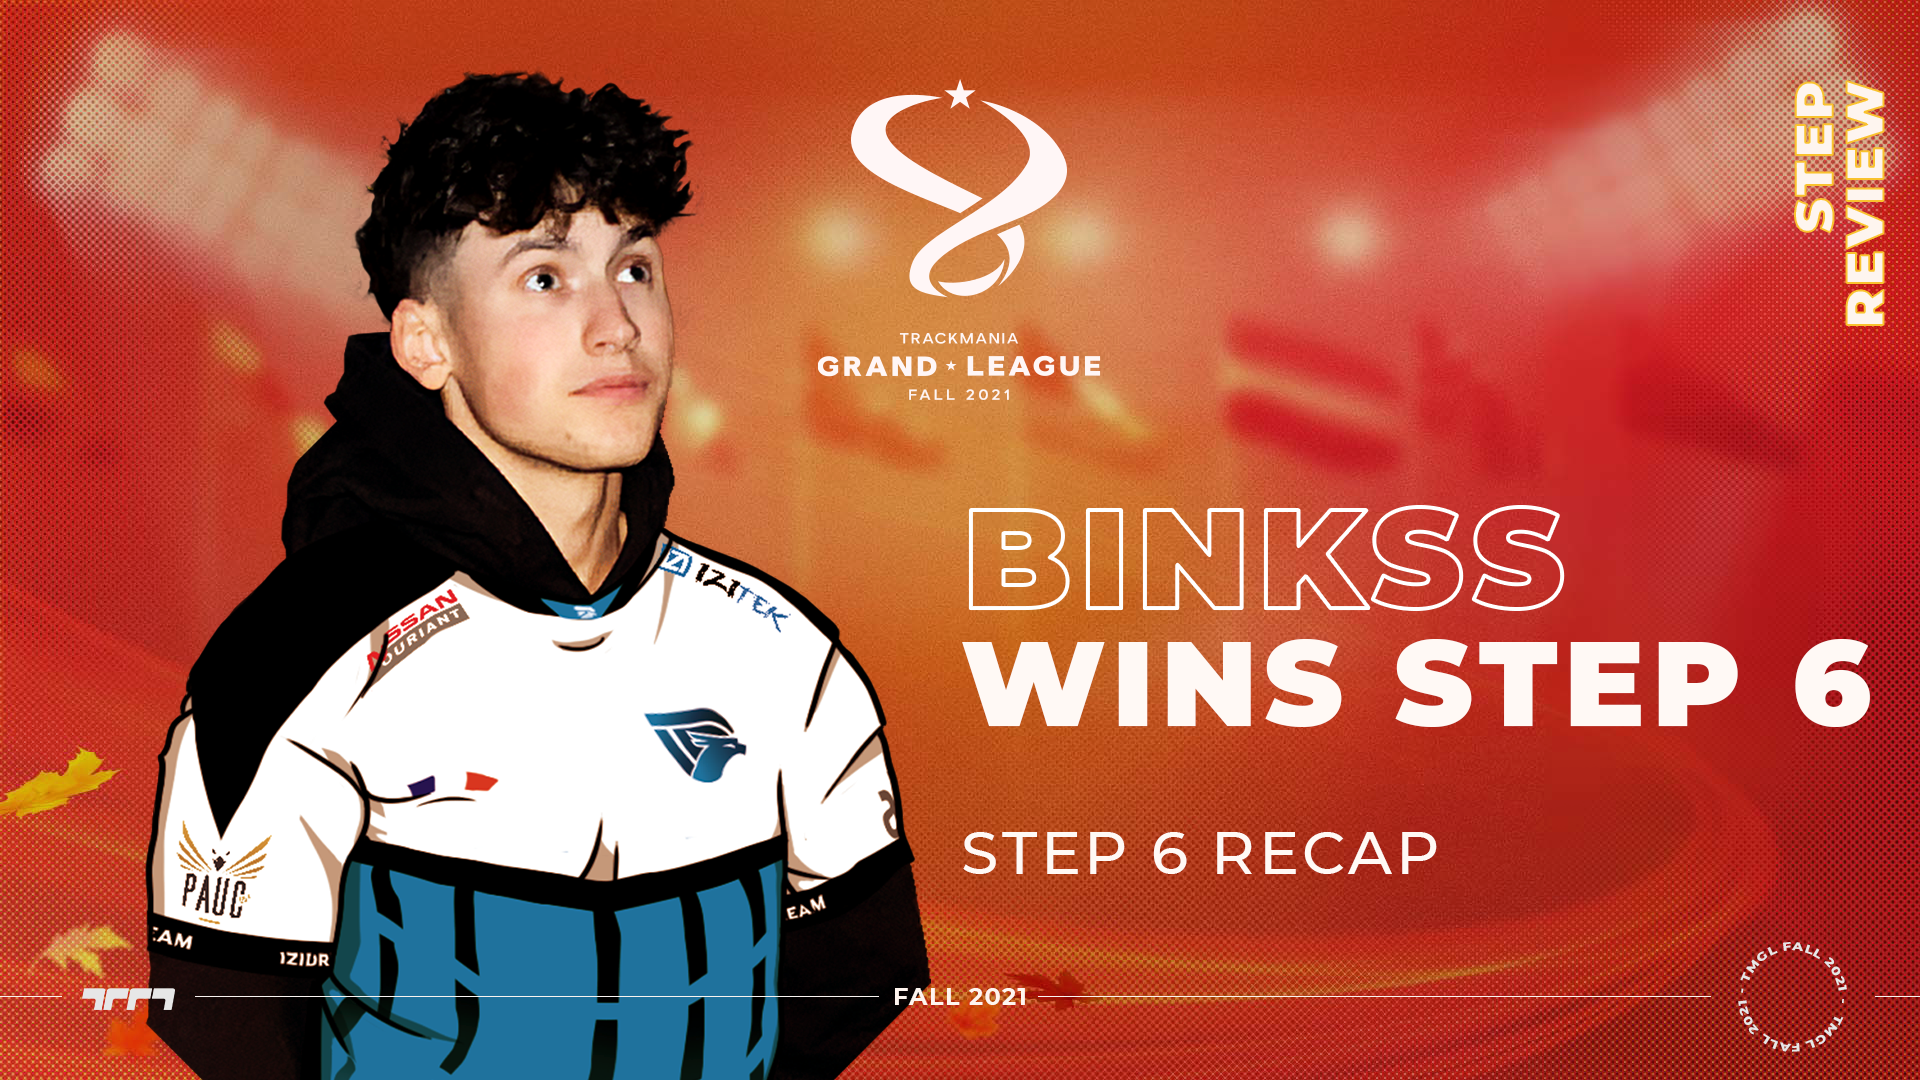 Back to back step win for Binkss!